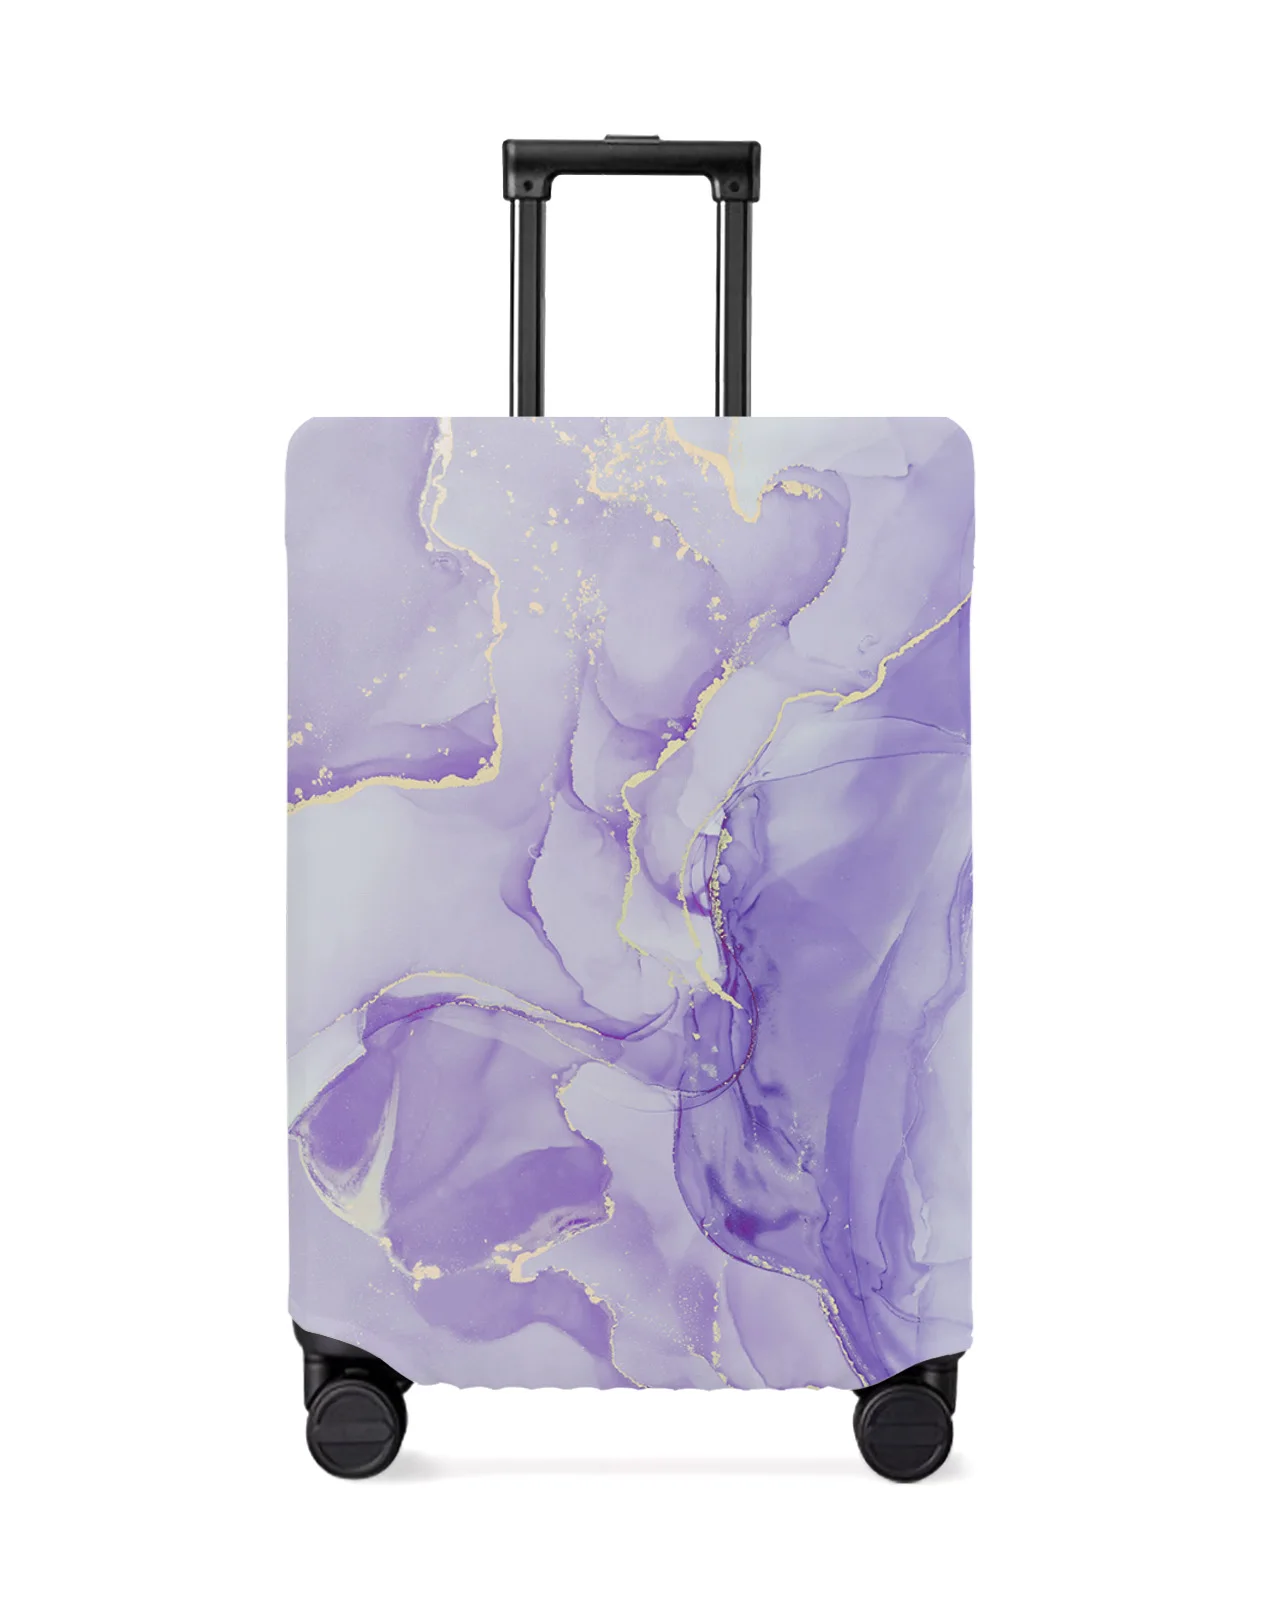 marble-texture-gradient-purple-luggage-cover-stretch-suitcase-protector-baggage-dust-cover-for-18-32-inch-travel-suitcase-case